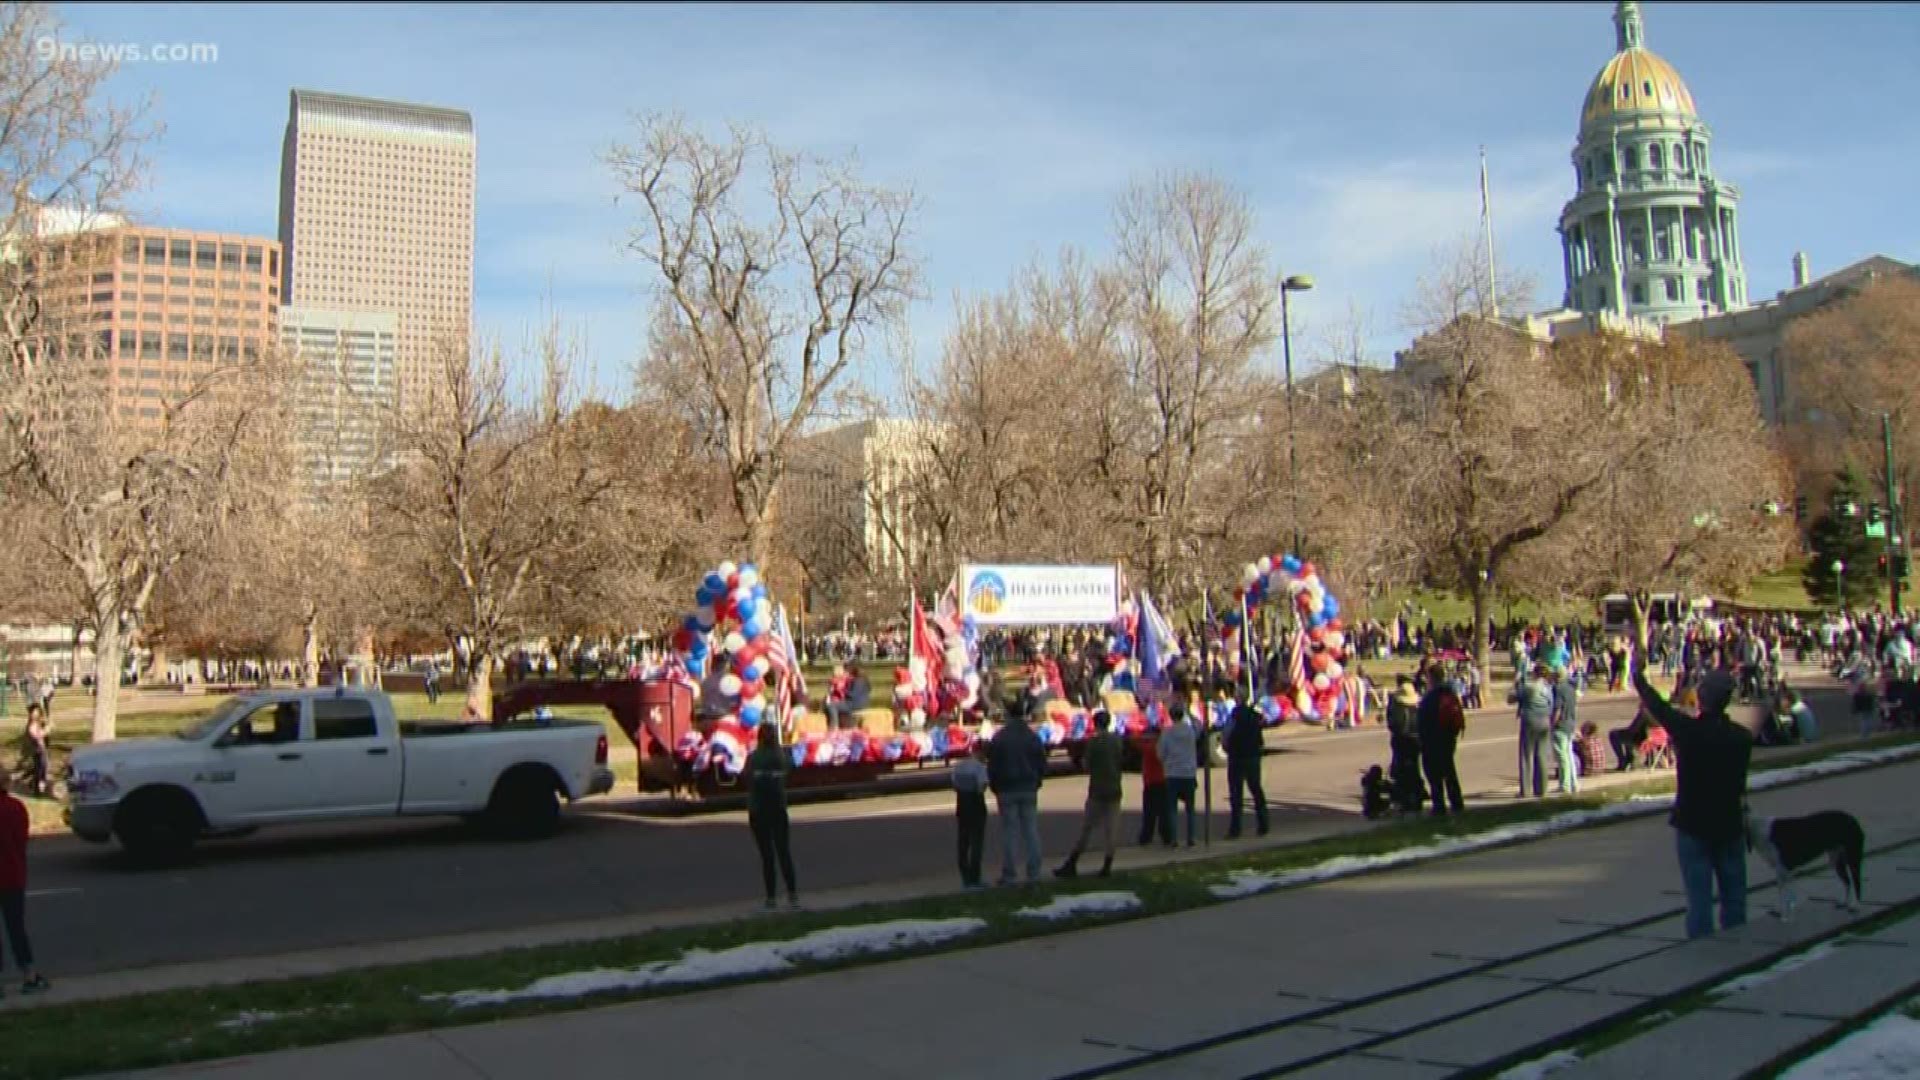 The streets around Civic Center Park were lined with people standing shoulder to shoulder to honor our country's veterans Saturday.